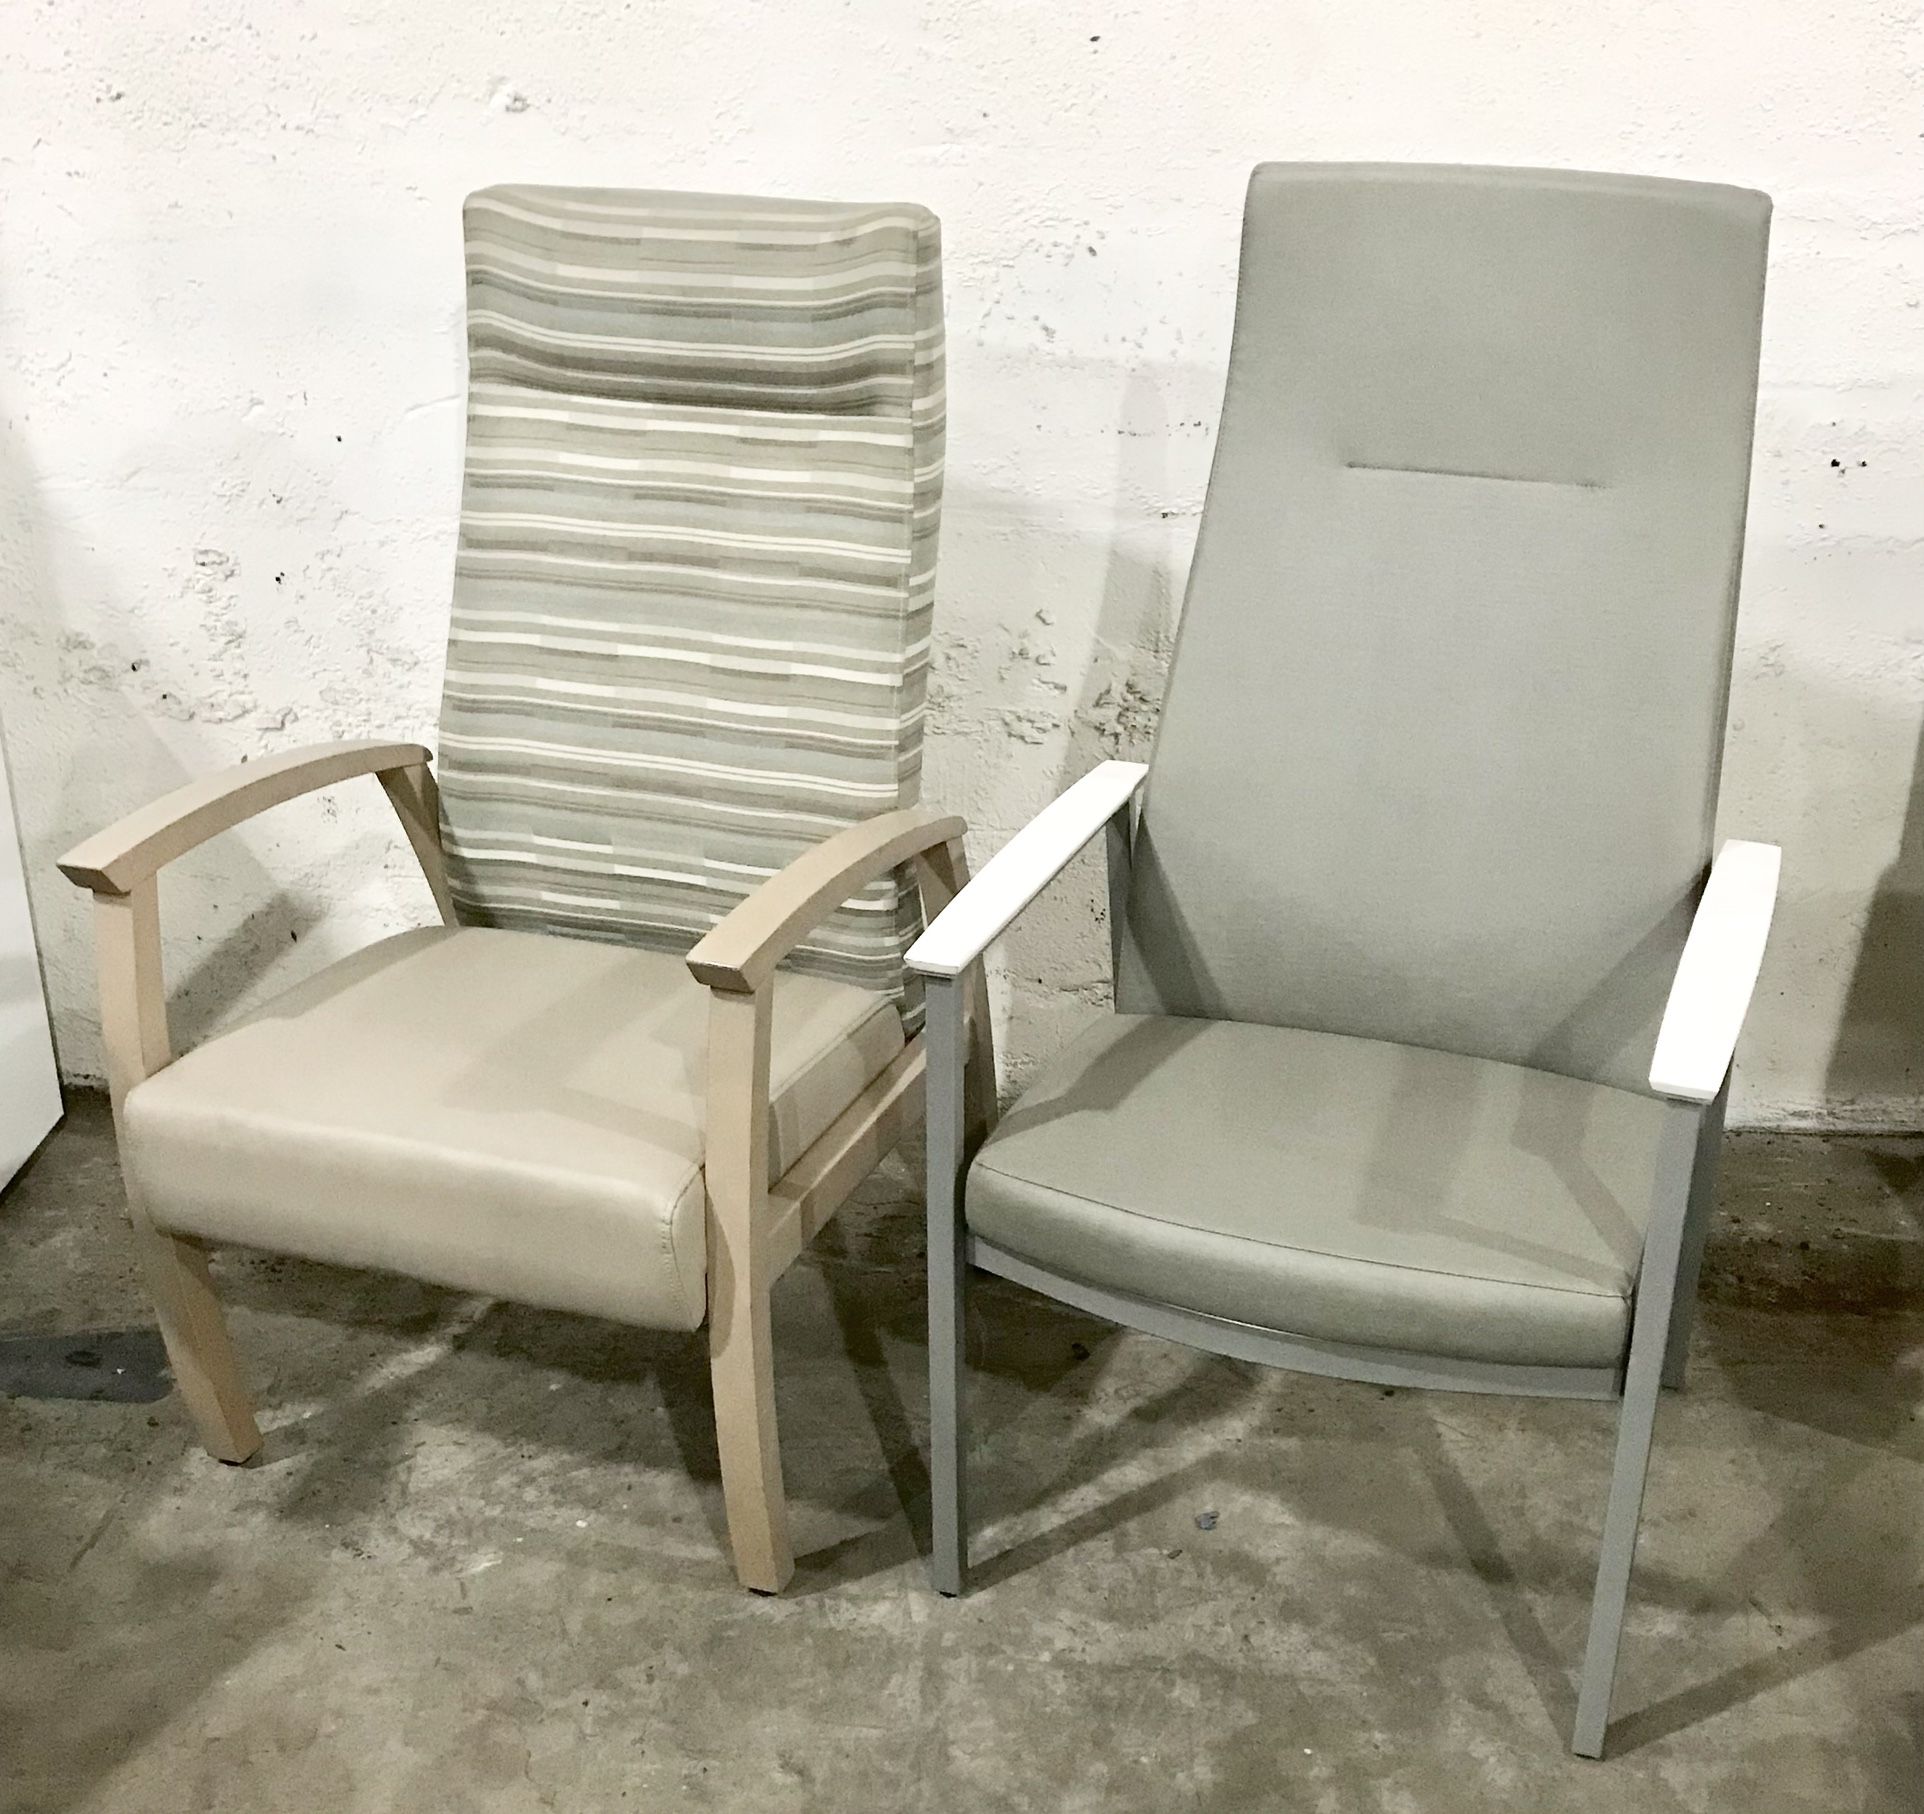 Chairs For Sale- Excellent Condition (Tampa)